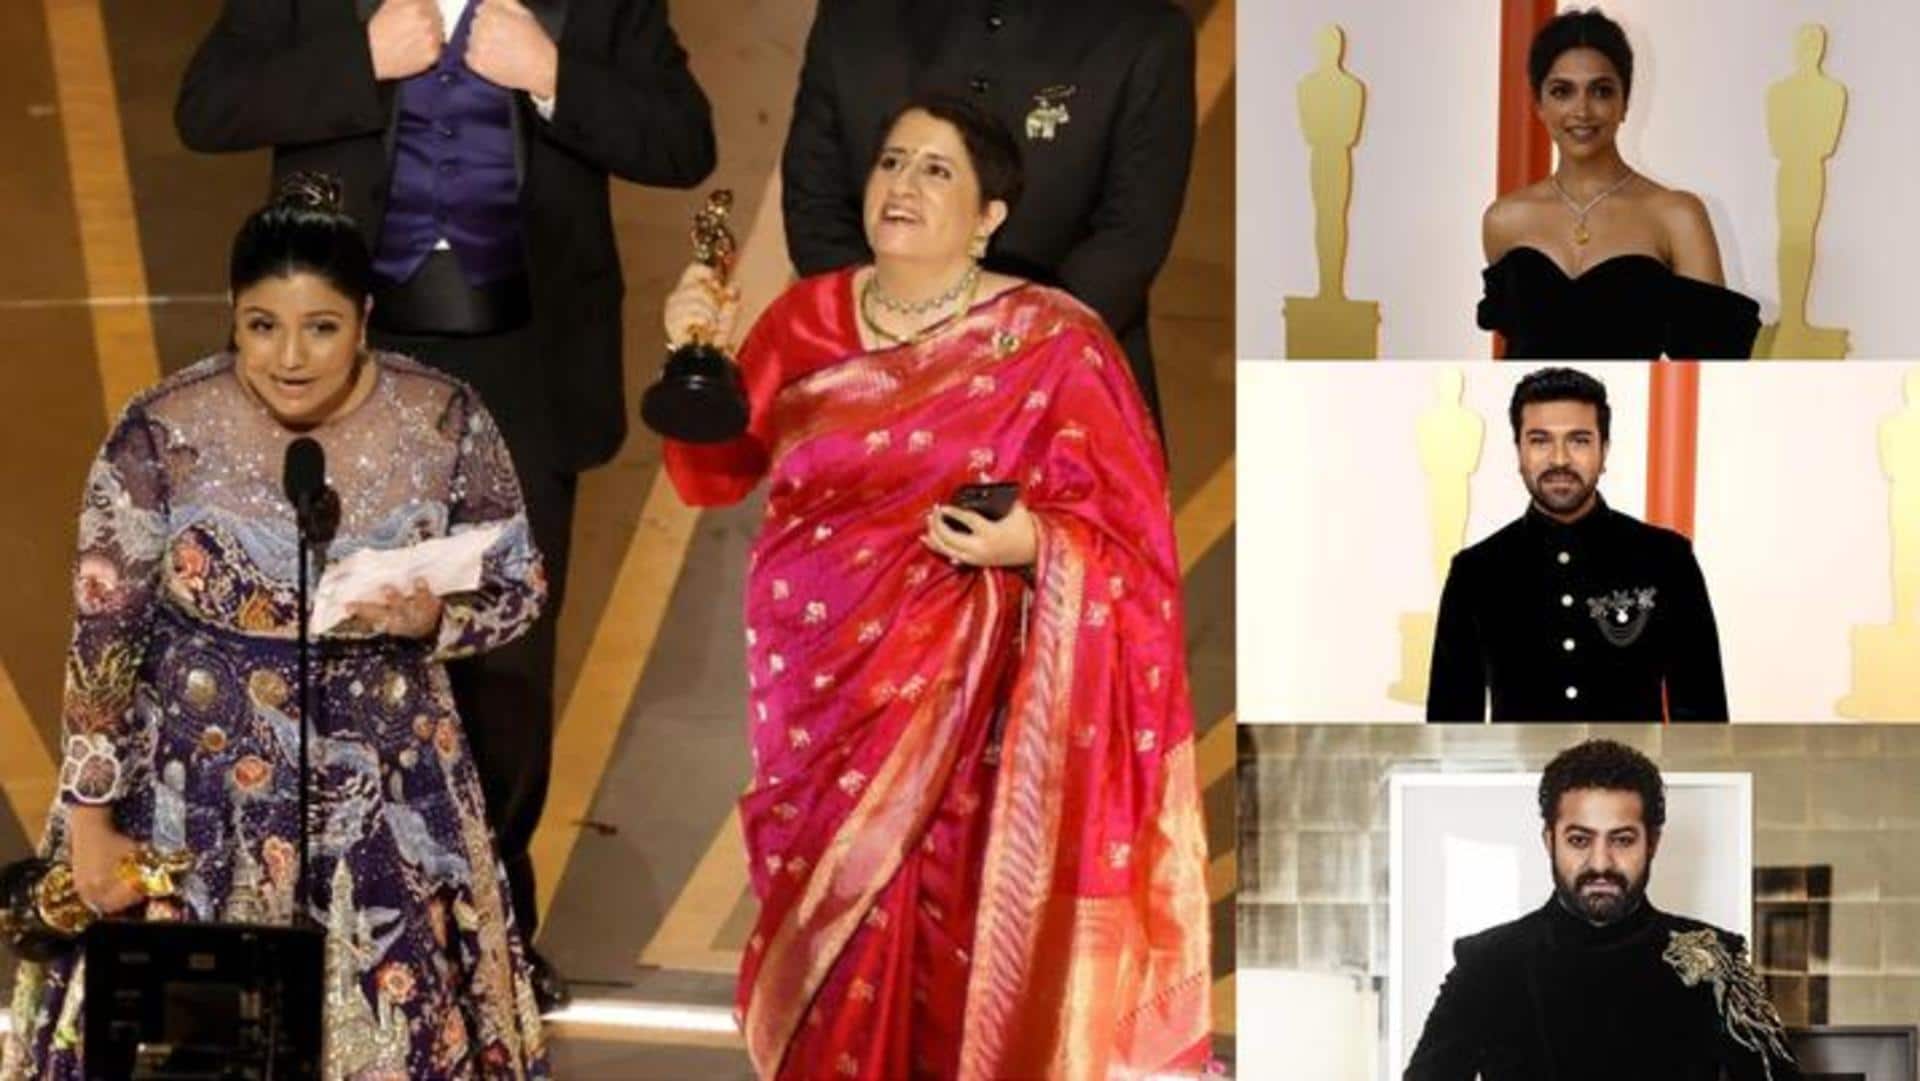 Indian celebrities rocked the Oscar red carpet: Take a look